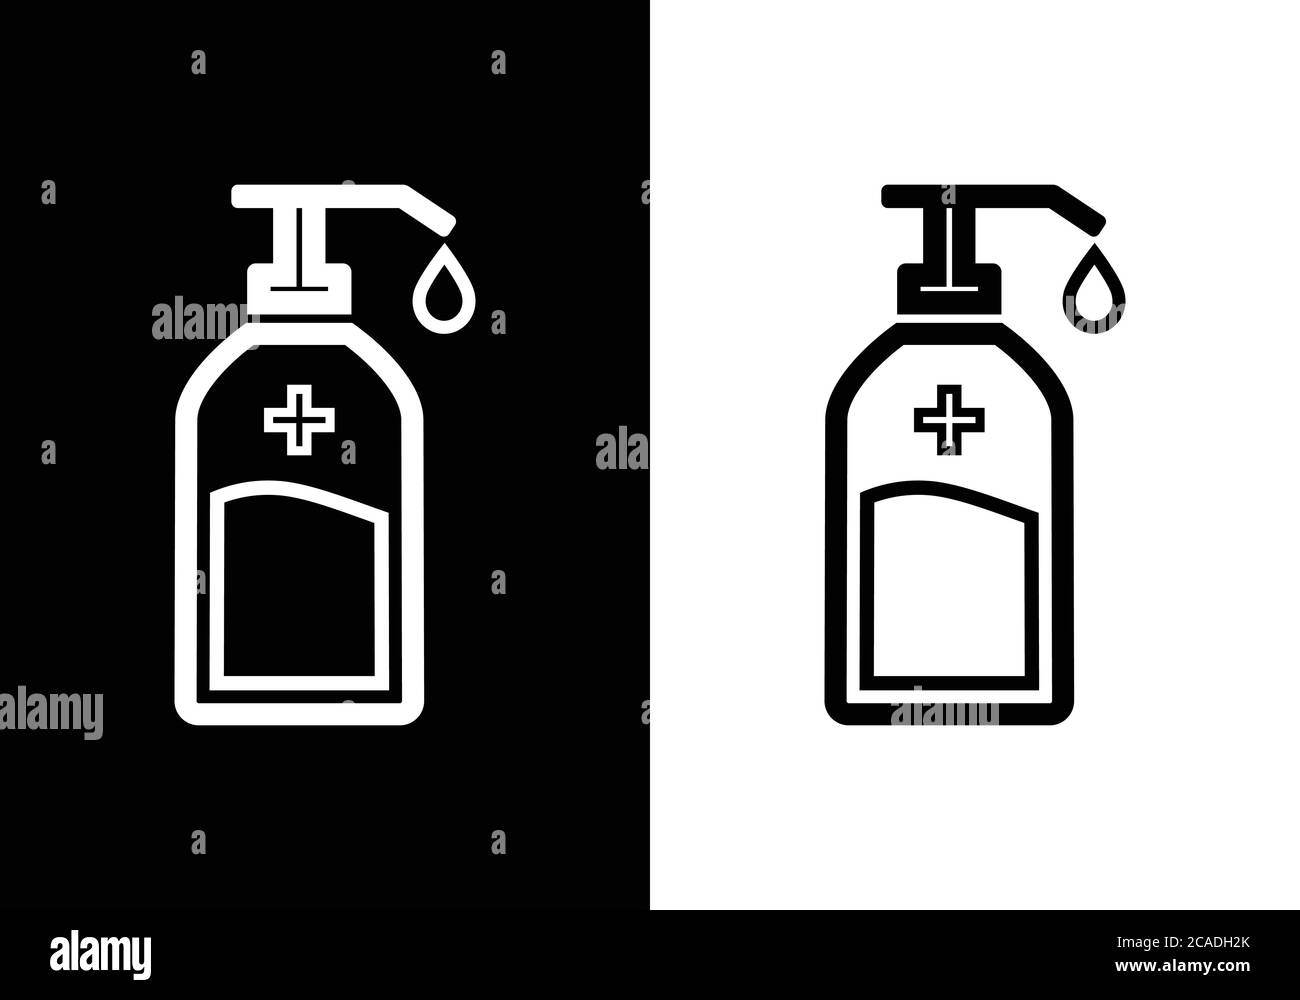 Sanitizer bottle flat vector icon for medical apps and websites Stock Vector